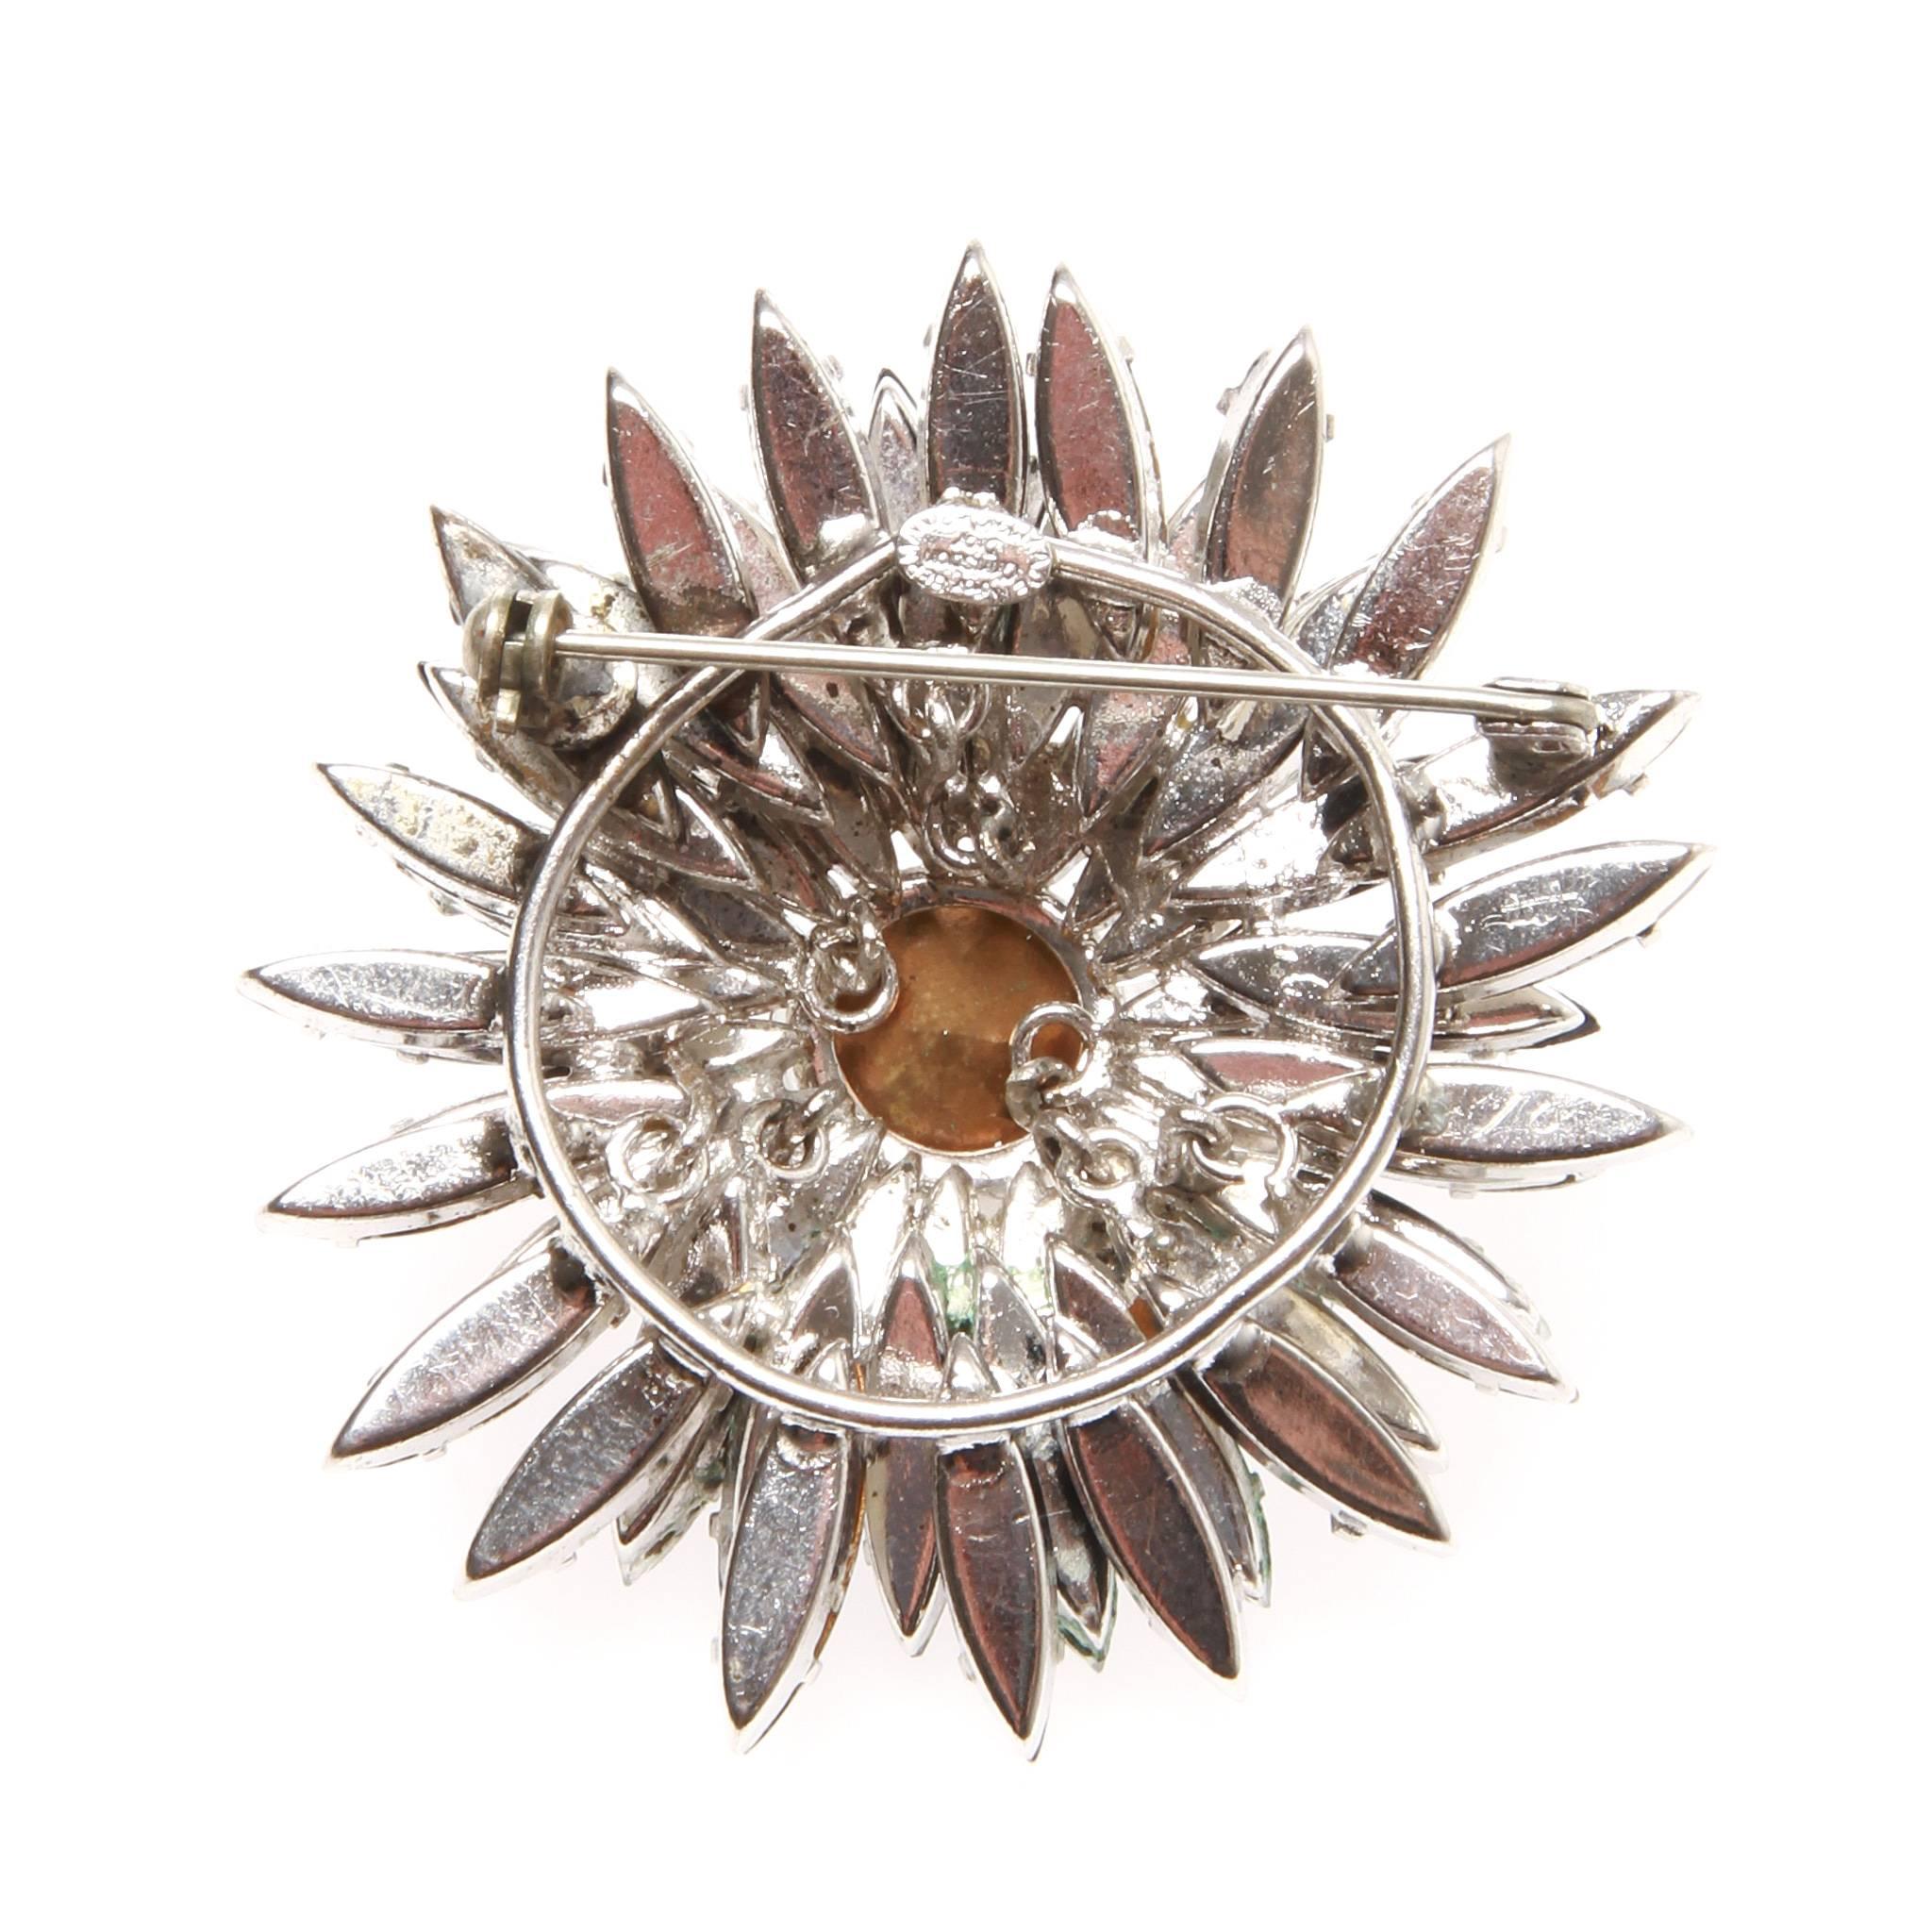 Christian Dior Vintage Flower Brooch

Black, Off White and Clear glass in a silver setting. 

Closure/Opening: Roll needle